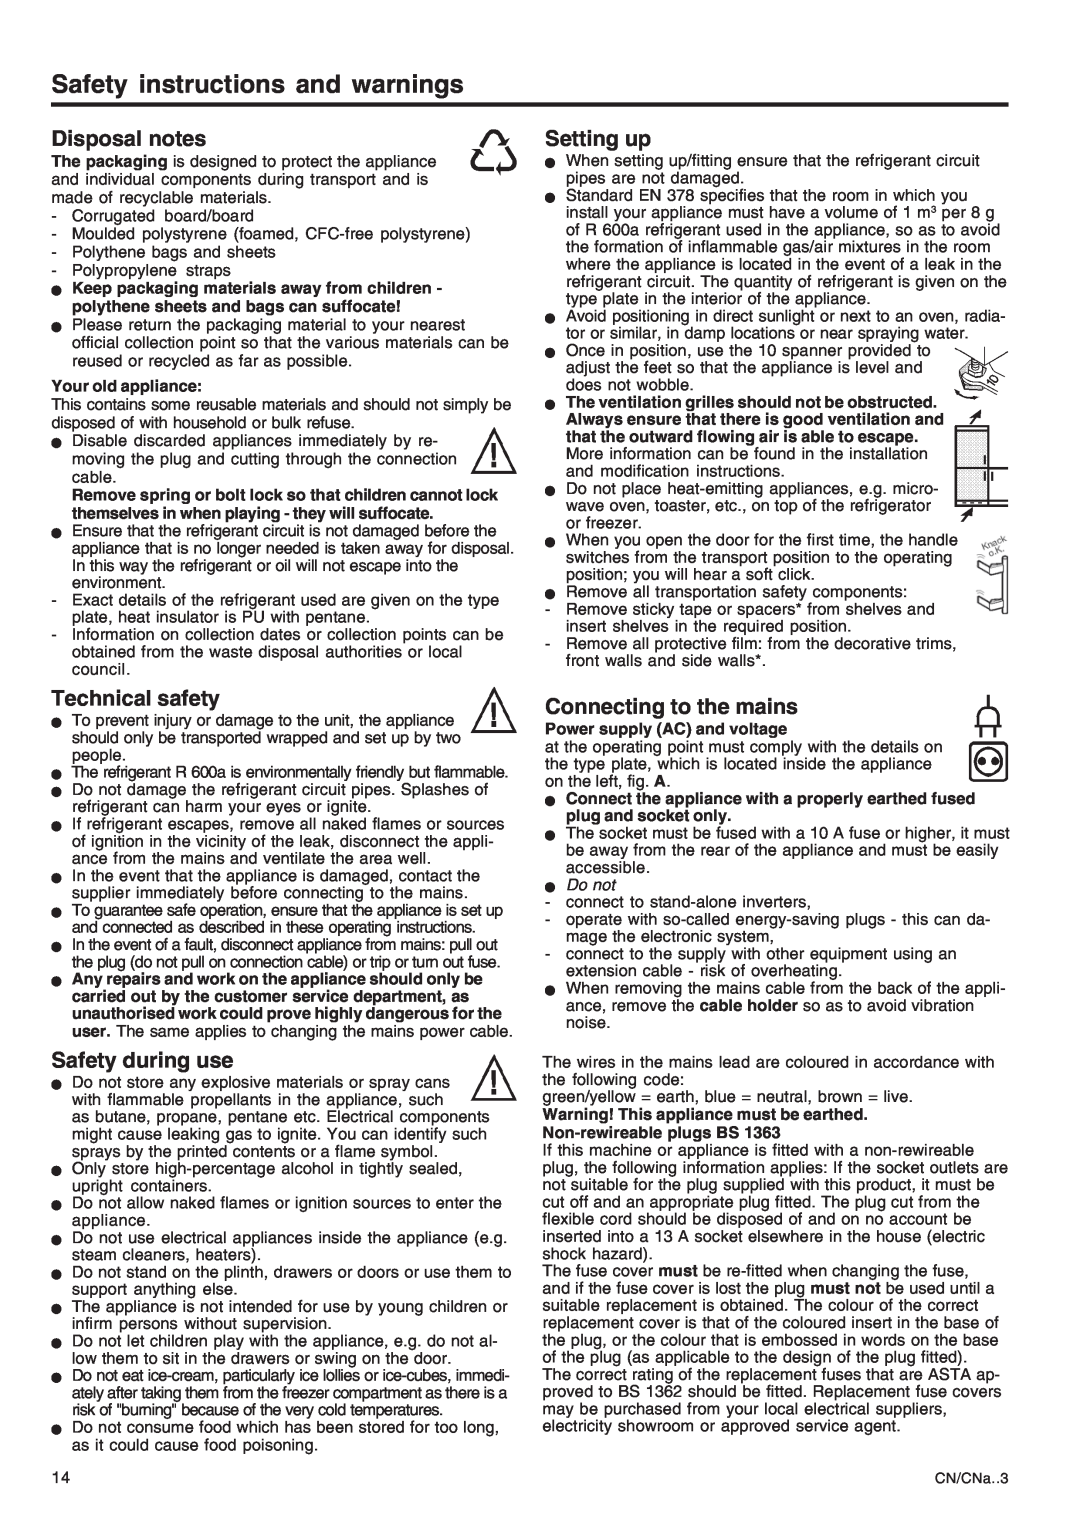 Liebherr 7082 224-00 Safety instructions and warnings, Disposal notes, Technical safety, Safety during use, Setting up 